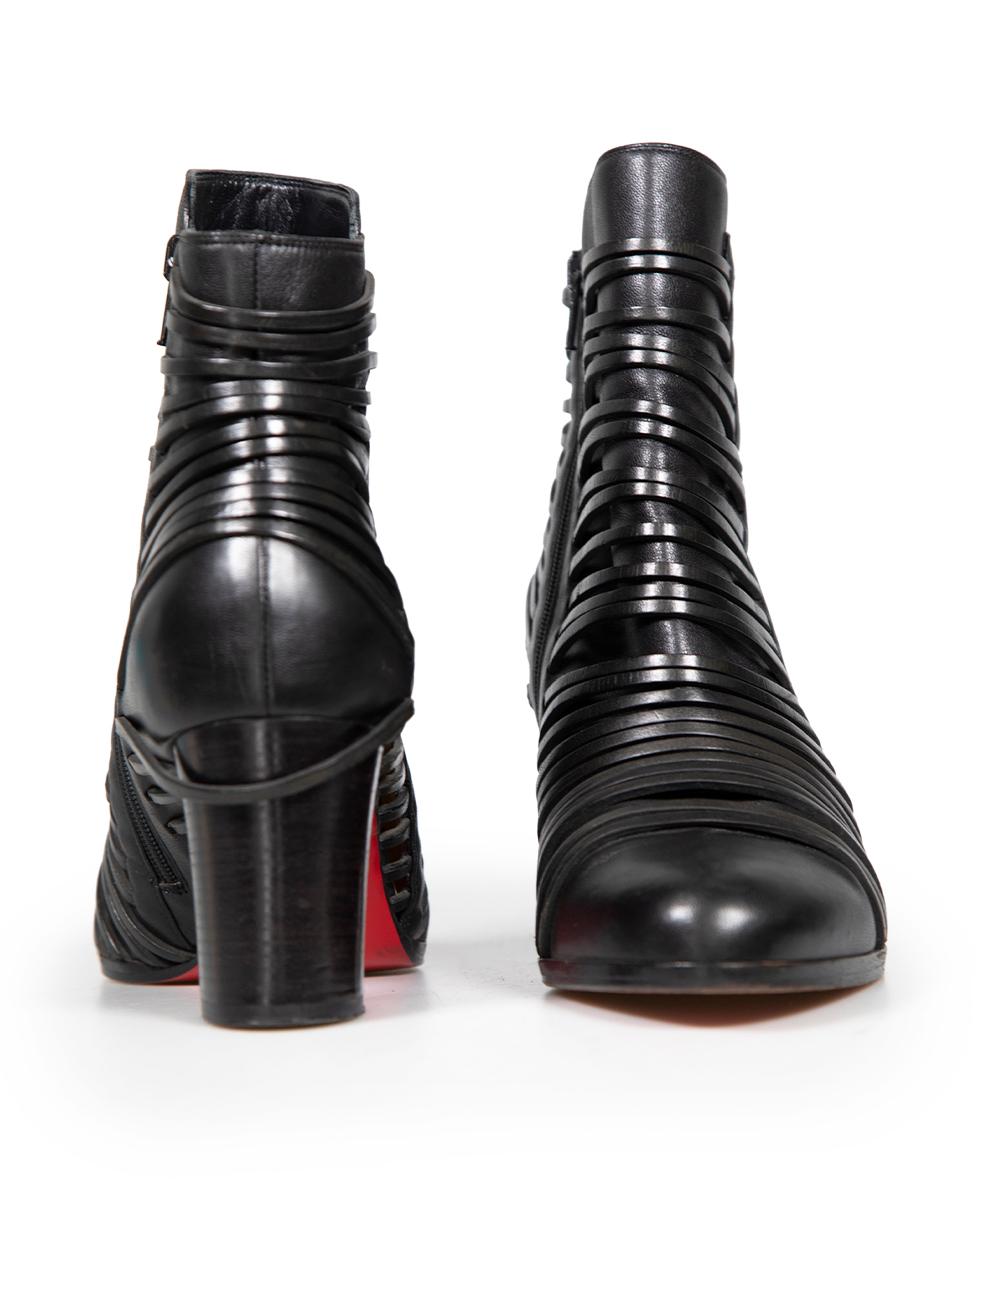 Christian Louboutin Black Strappy Ankle Boots Size IT 41 In Good Condition For Sale In London, GB